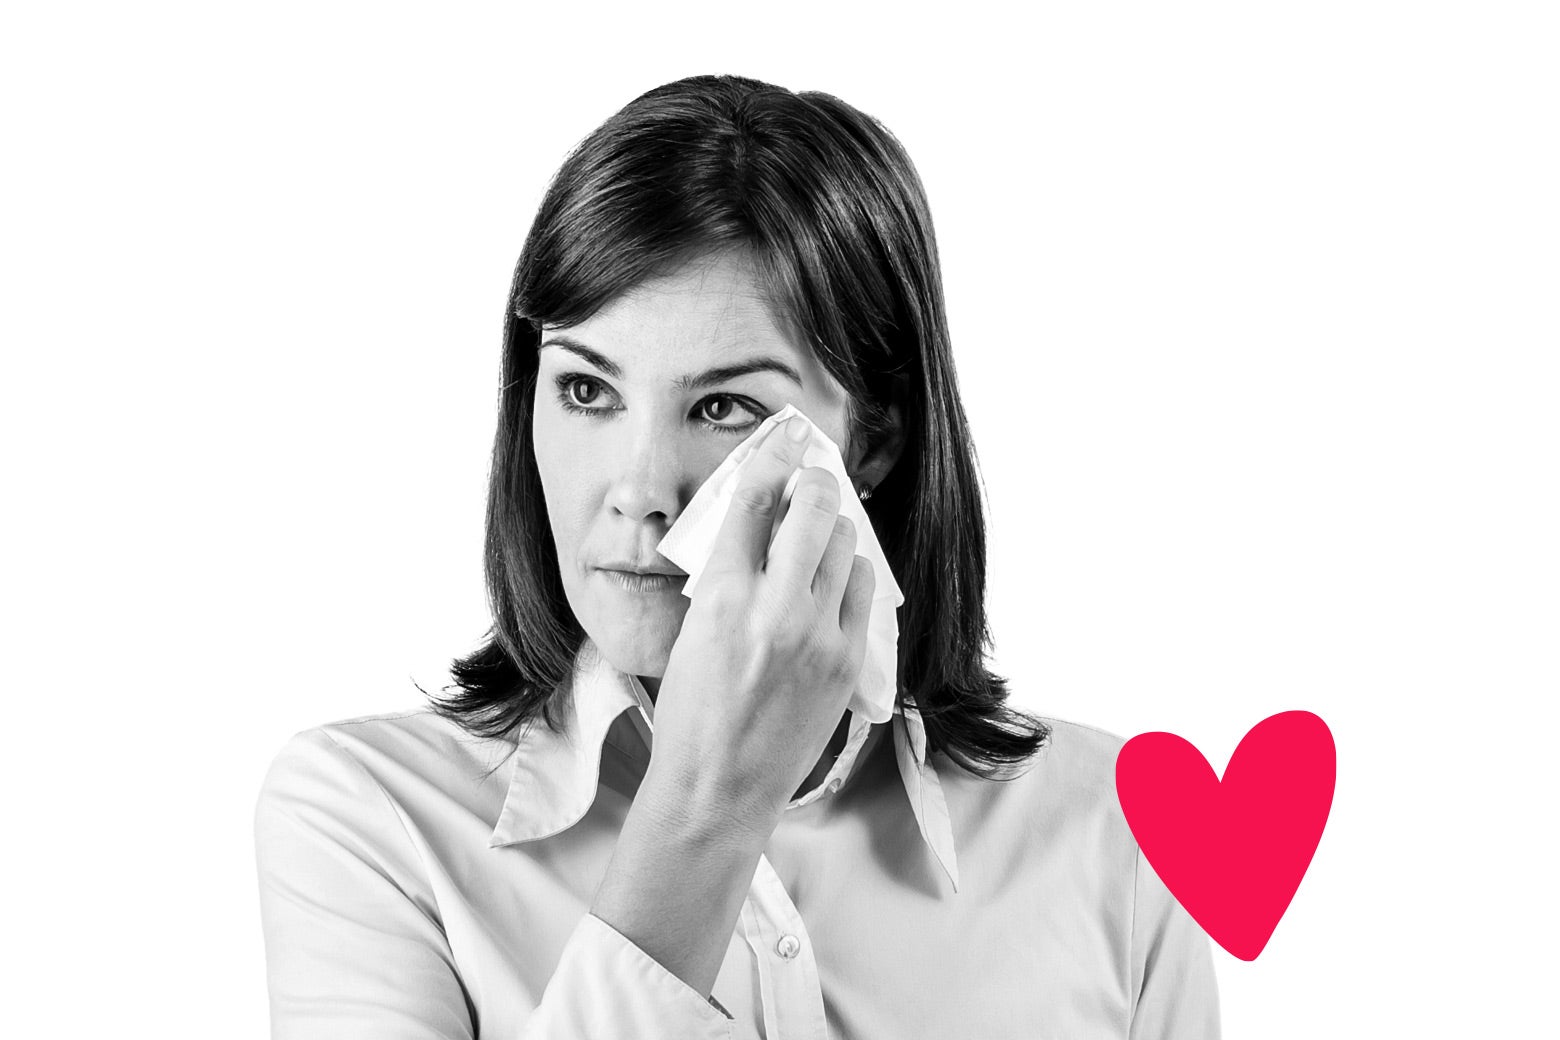 A woman dabs her eyes with a tissue, with an illo heart on her sleeve.